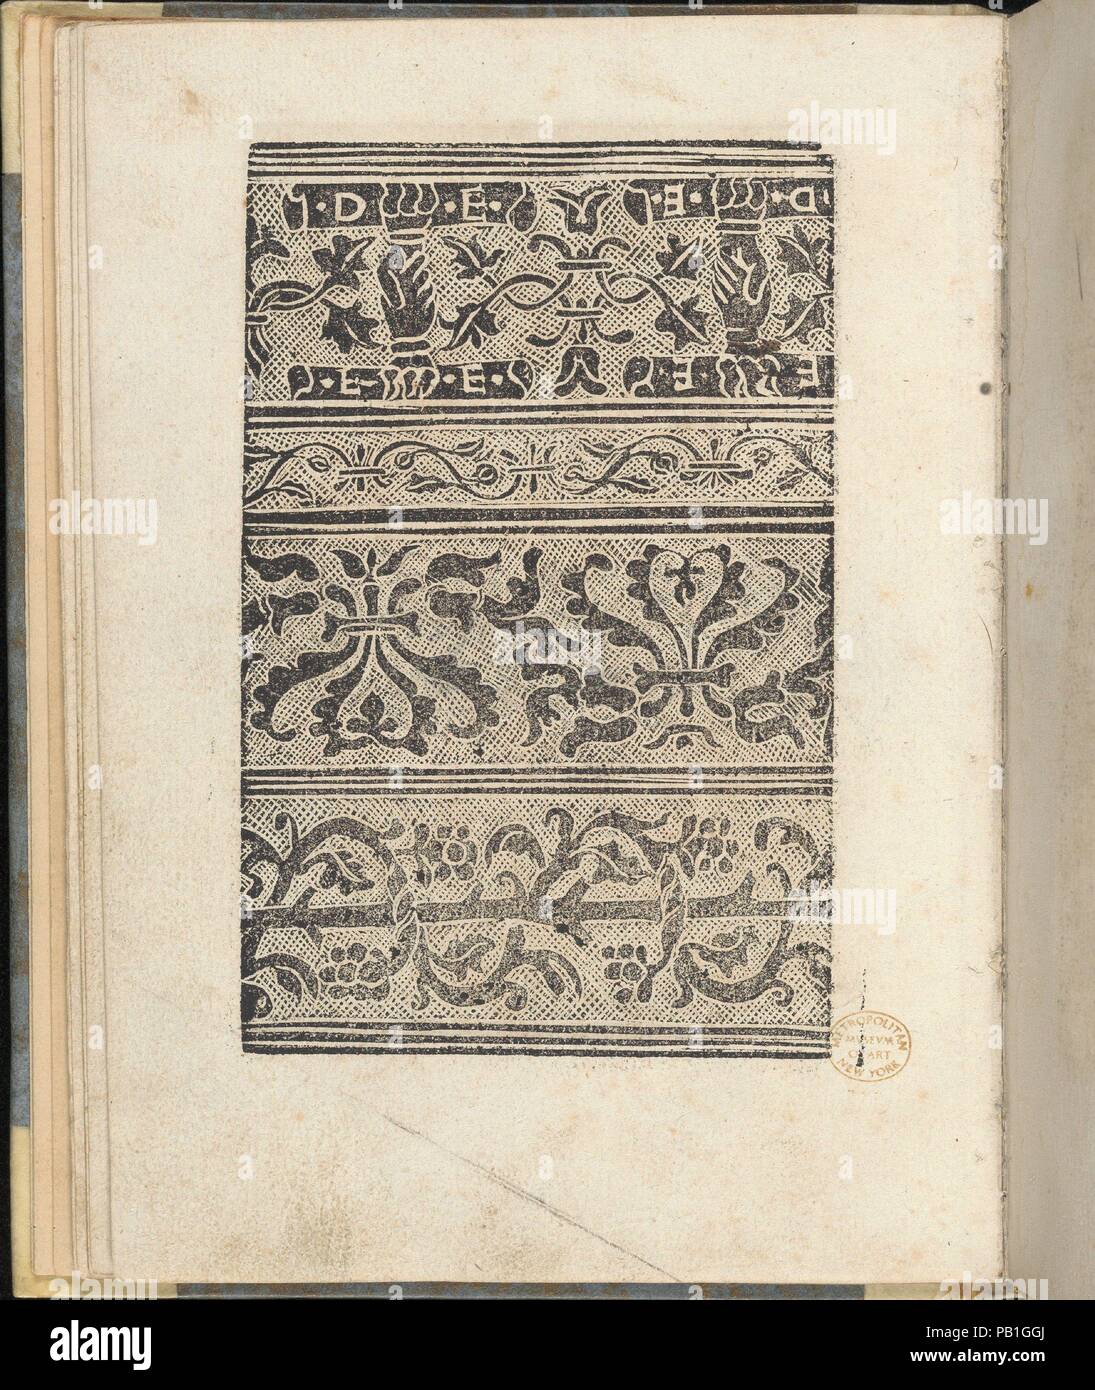 Ein ney Furmbüchlein, Page 17, verso. Dimensions: Other: 7 7/8 x 6 1/8 in. (20 x 15.5 cm). Publisher: Johann Schönsperger the Younger (German, active 1510-30). Date: ca. 1525-29. Museum: Metropolitan Museum of Art, New York, USA. Stock Photo